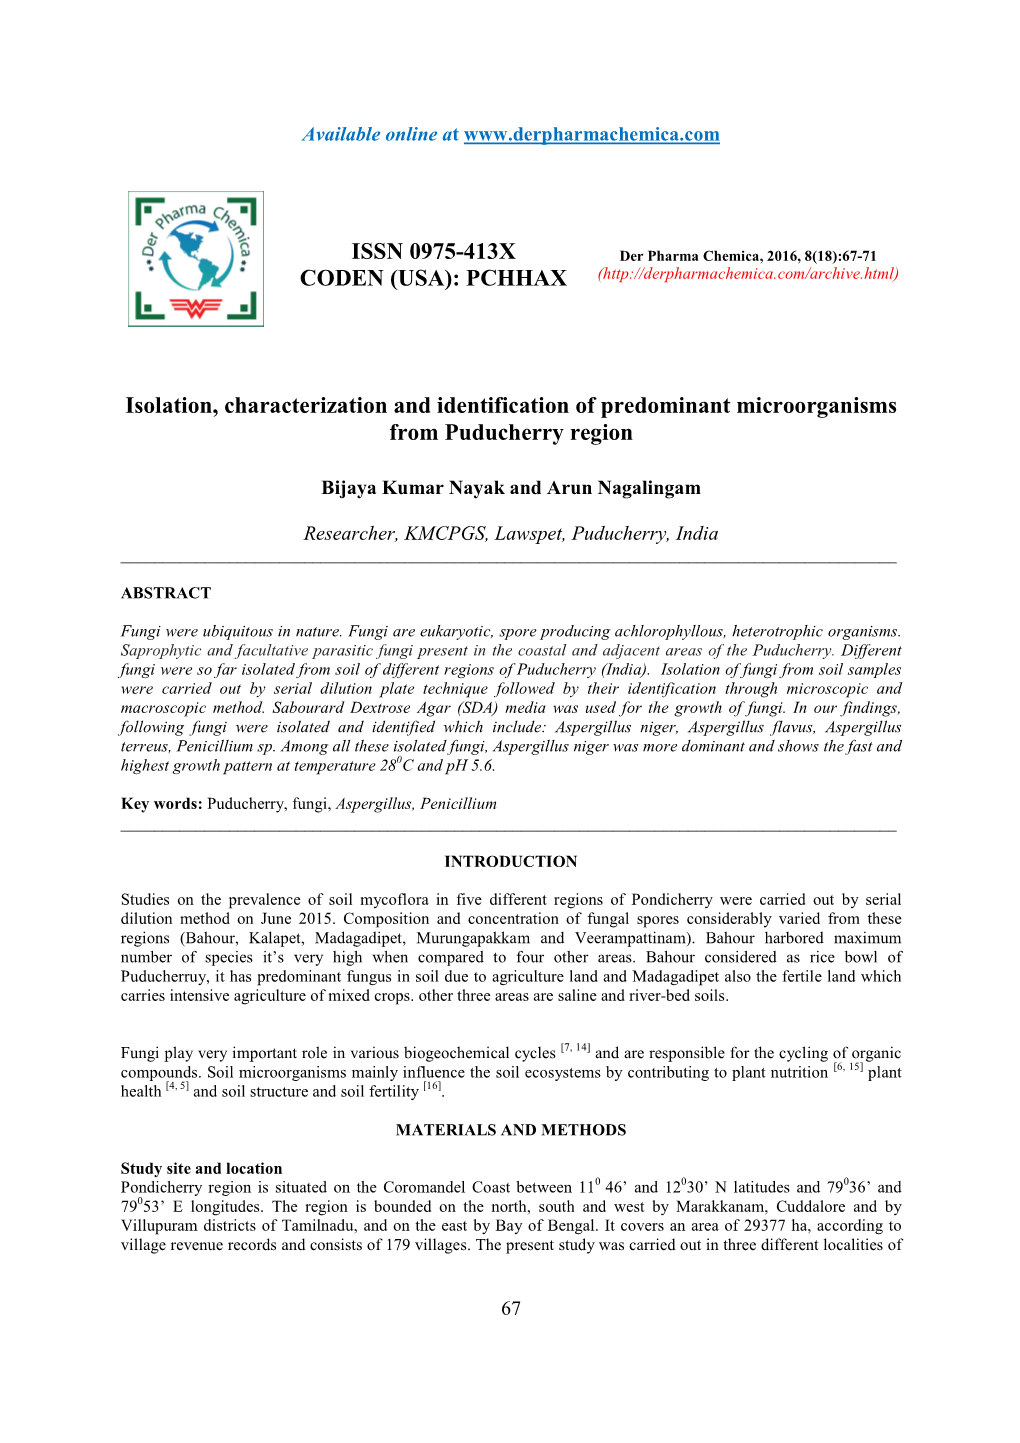 Isolation, Characterization and Identification of Predominant Microorganisms from Puducherry Region